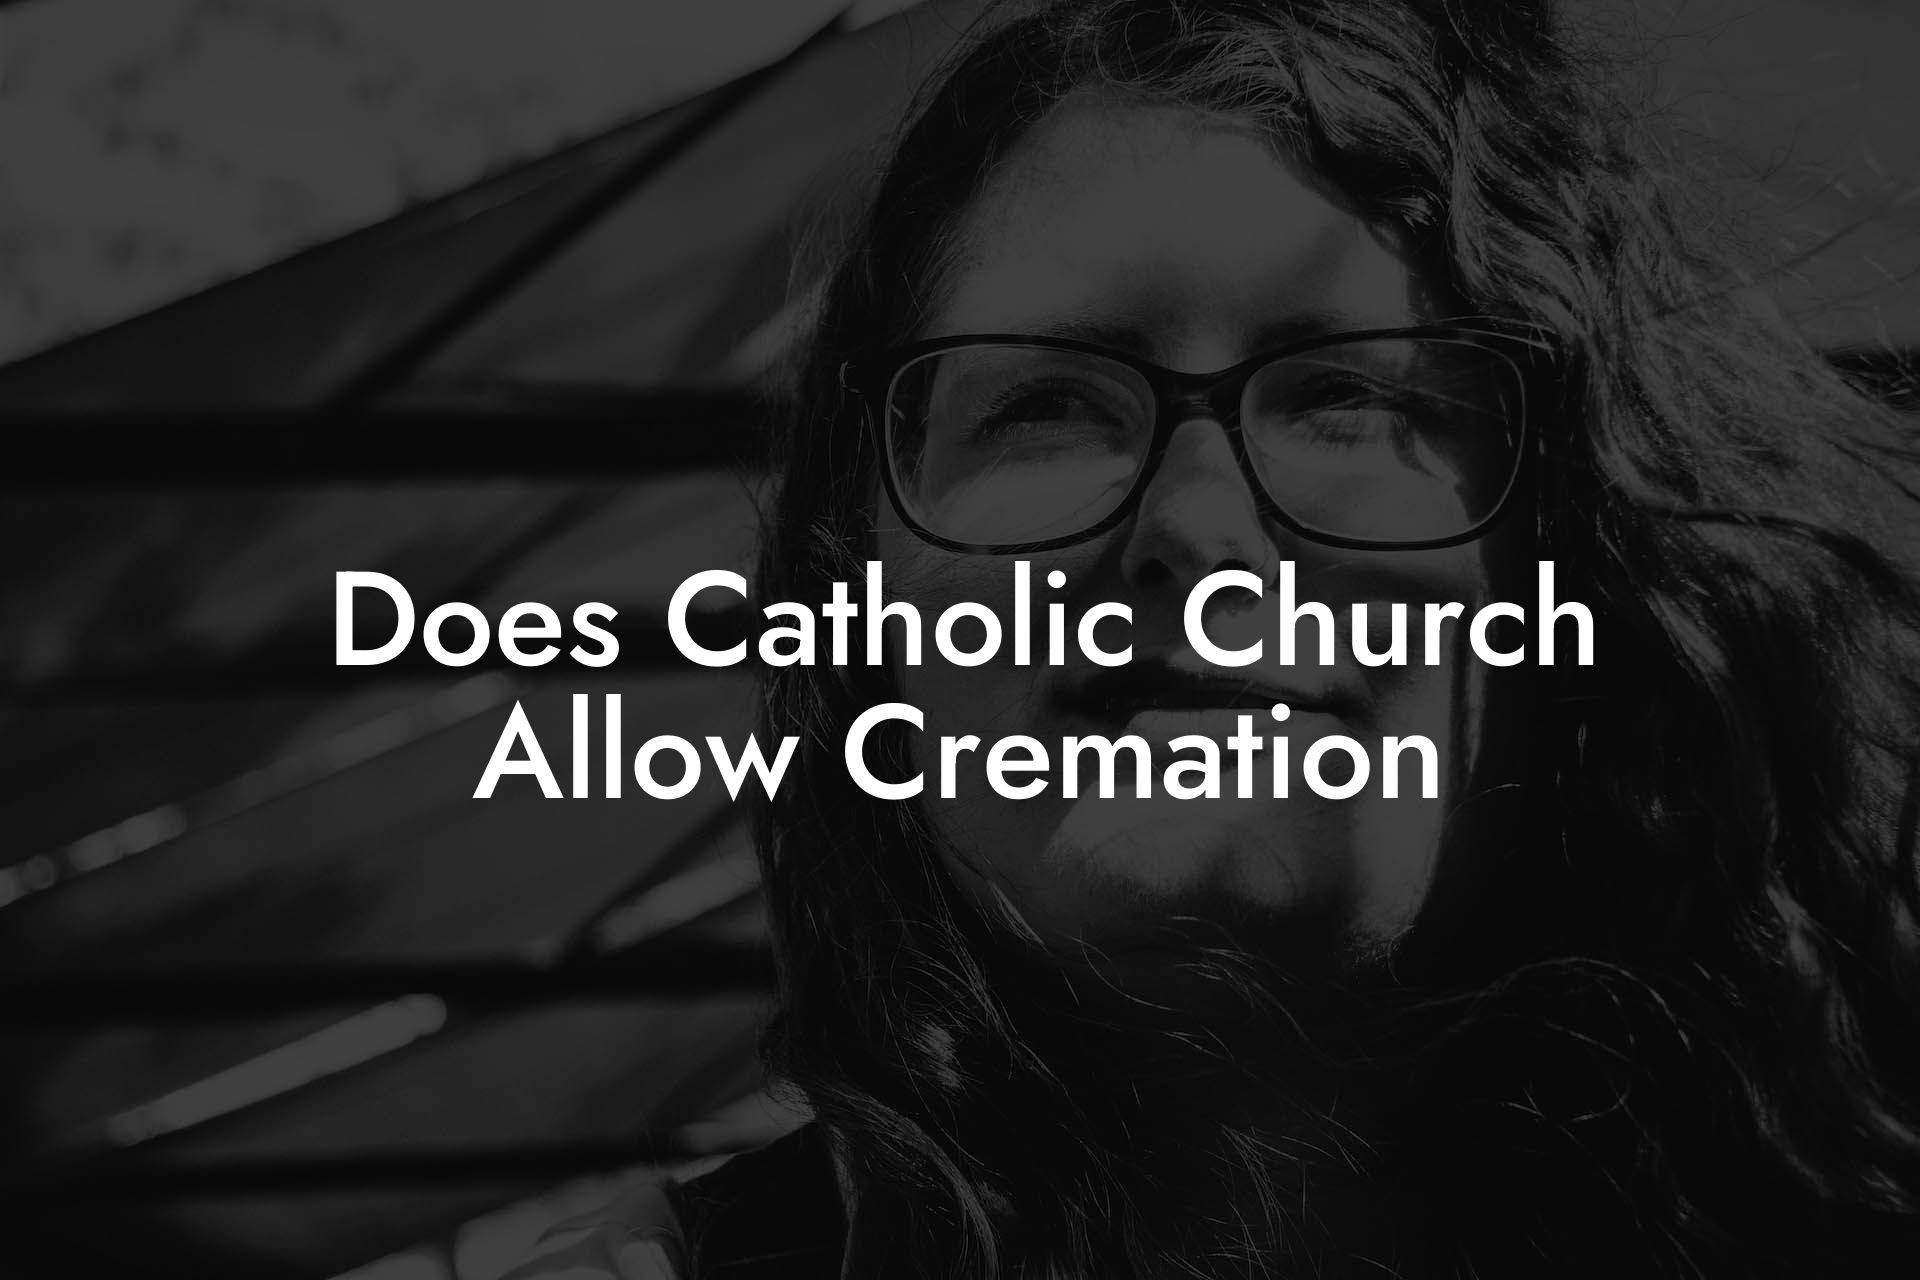 Does Catholic Church Allow Cremation